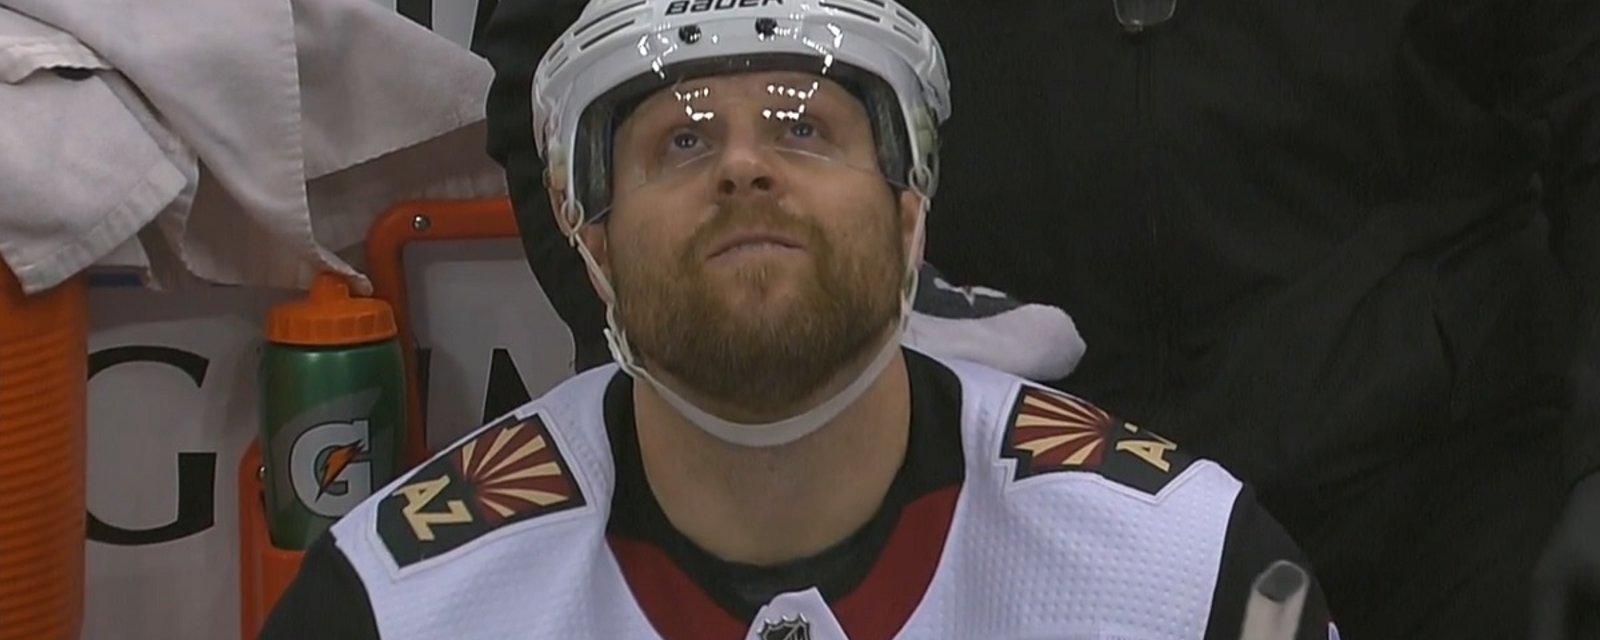 Phil Kessel “teary-eyed” after emotional ovation from fans in Pittsburgh.